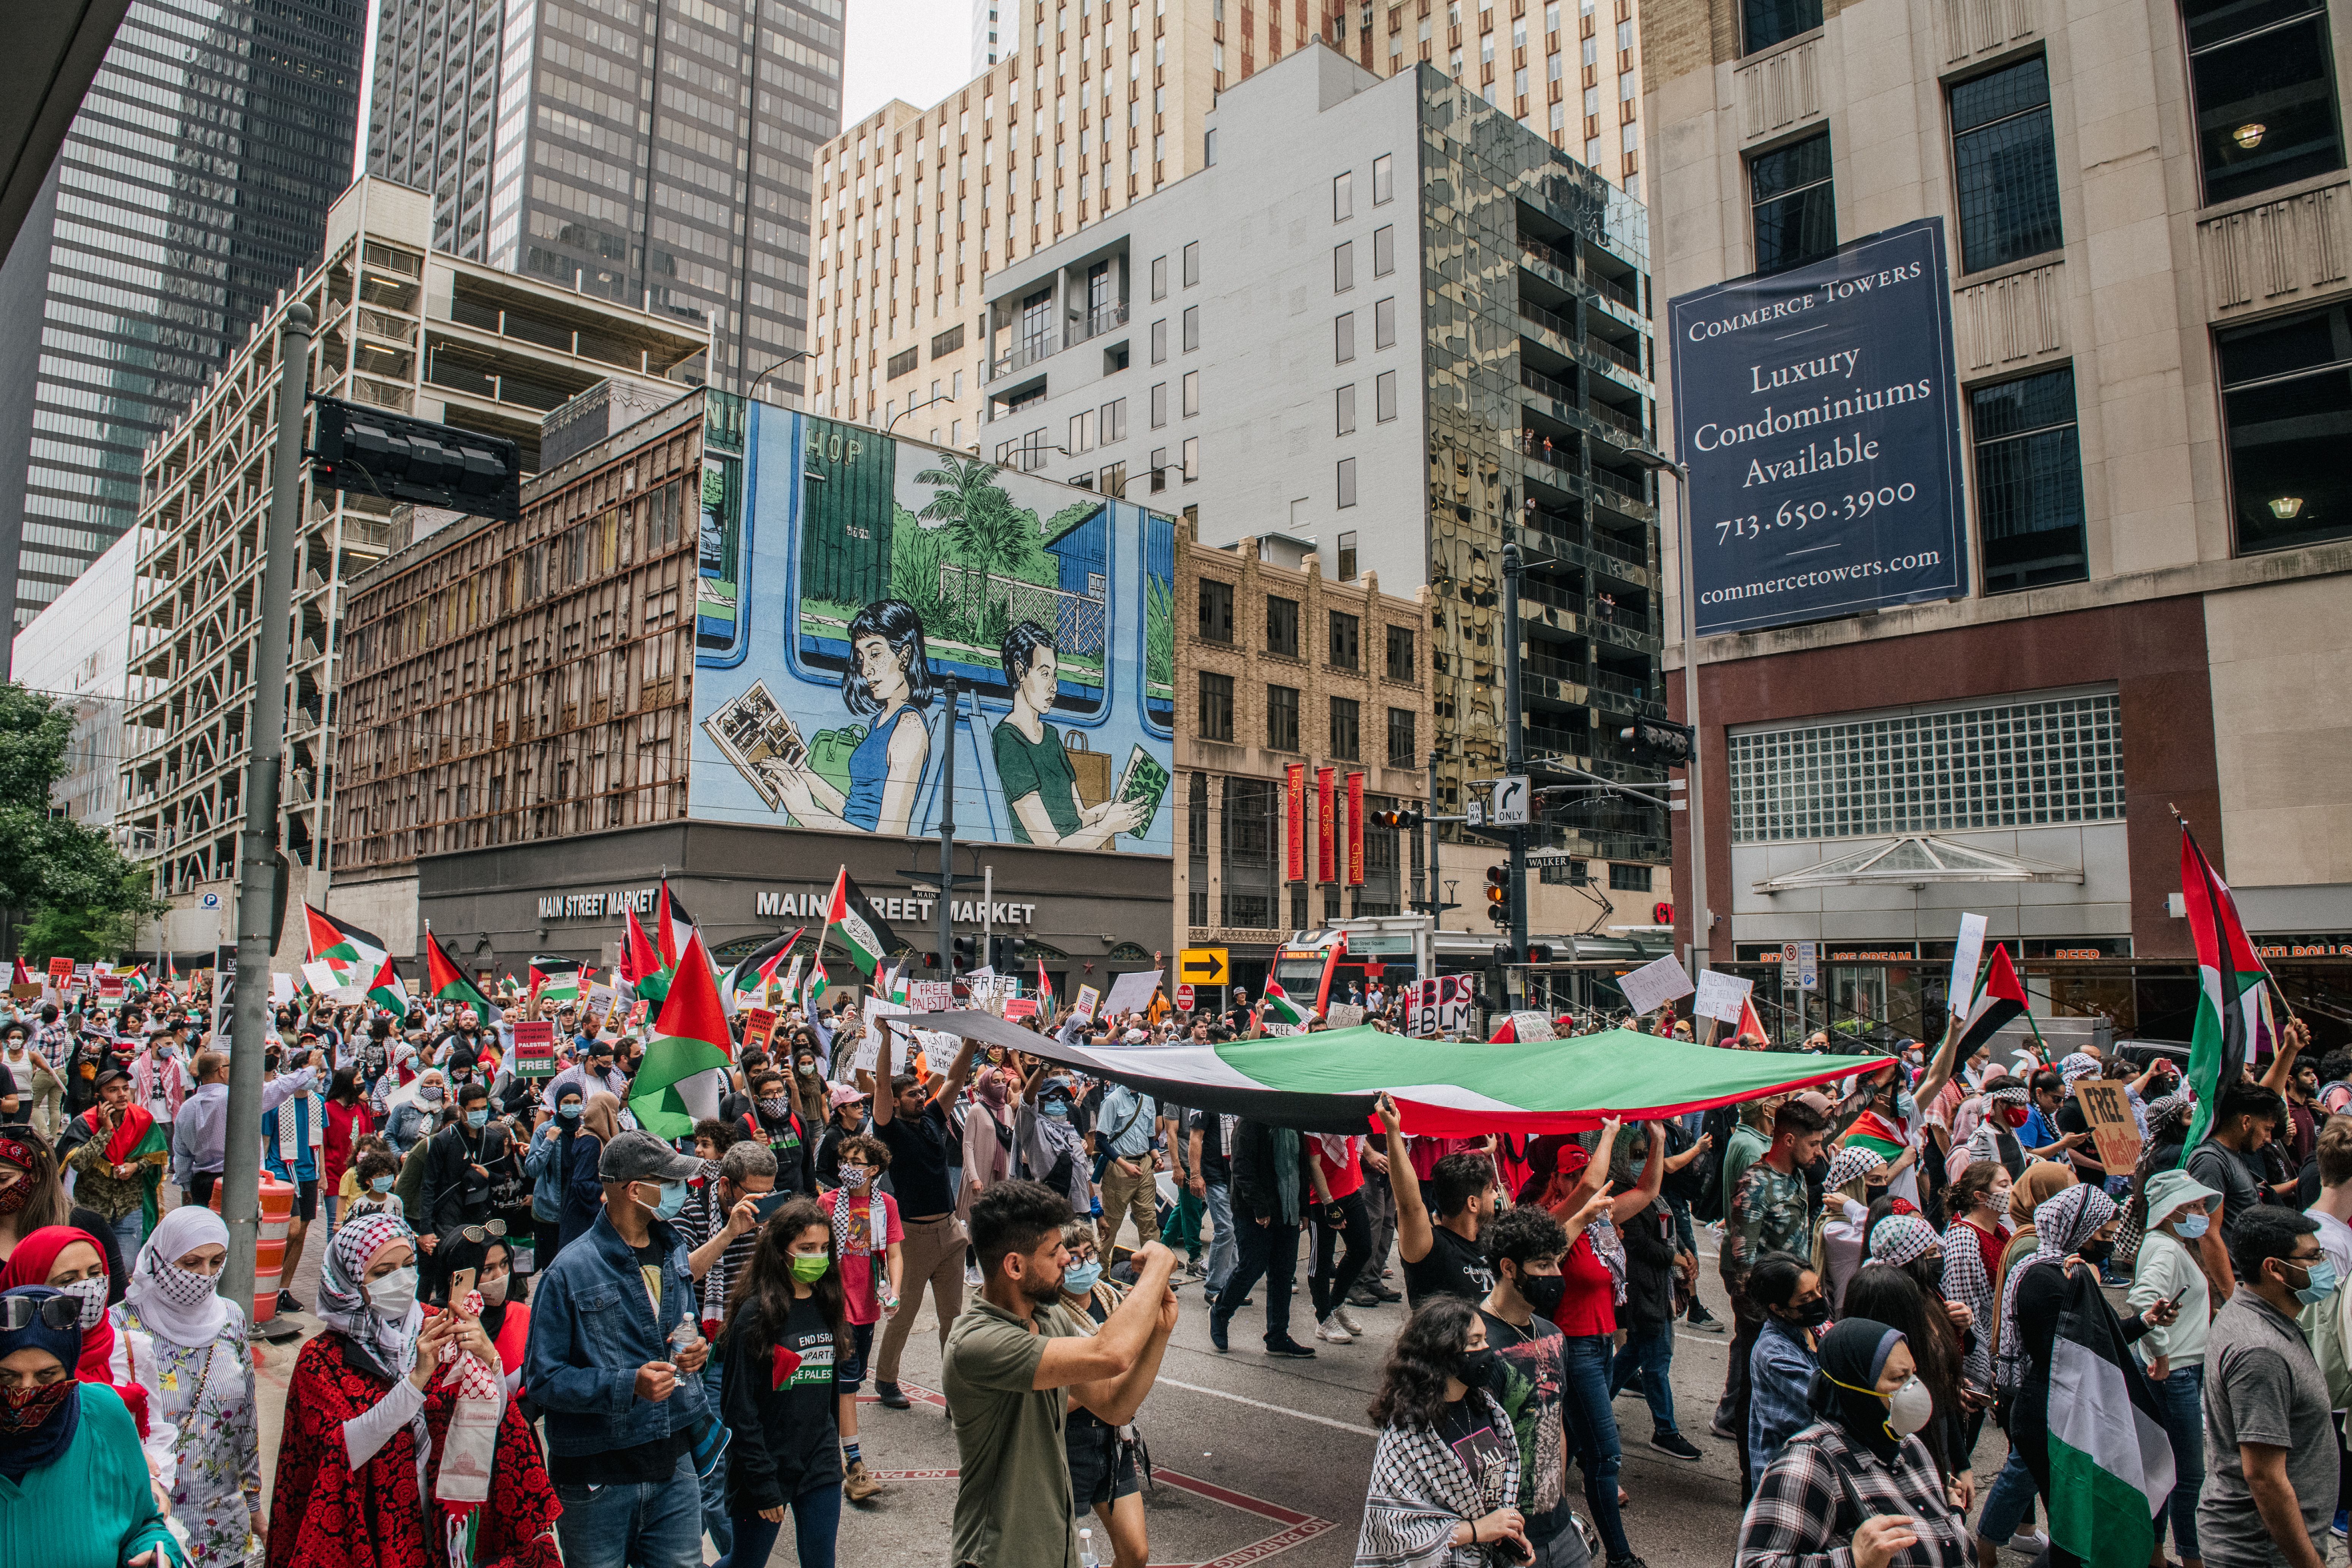 People carry the Palestinian flag during a march to the Houston City Hall on May 15, 2021 in Houston, Texas.